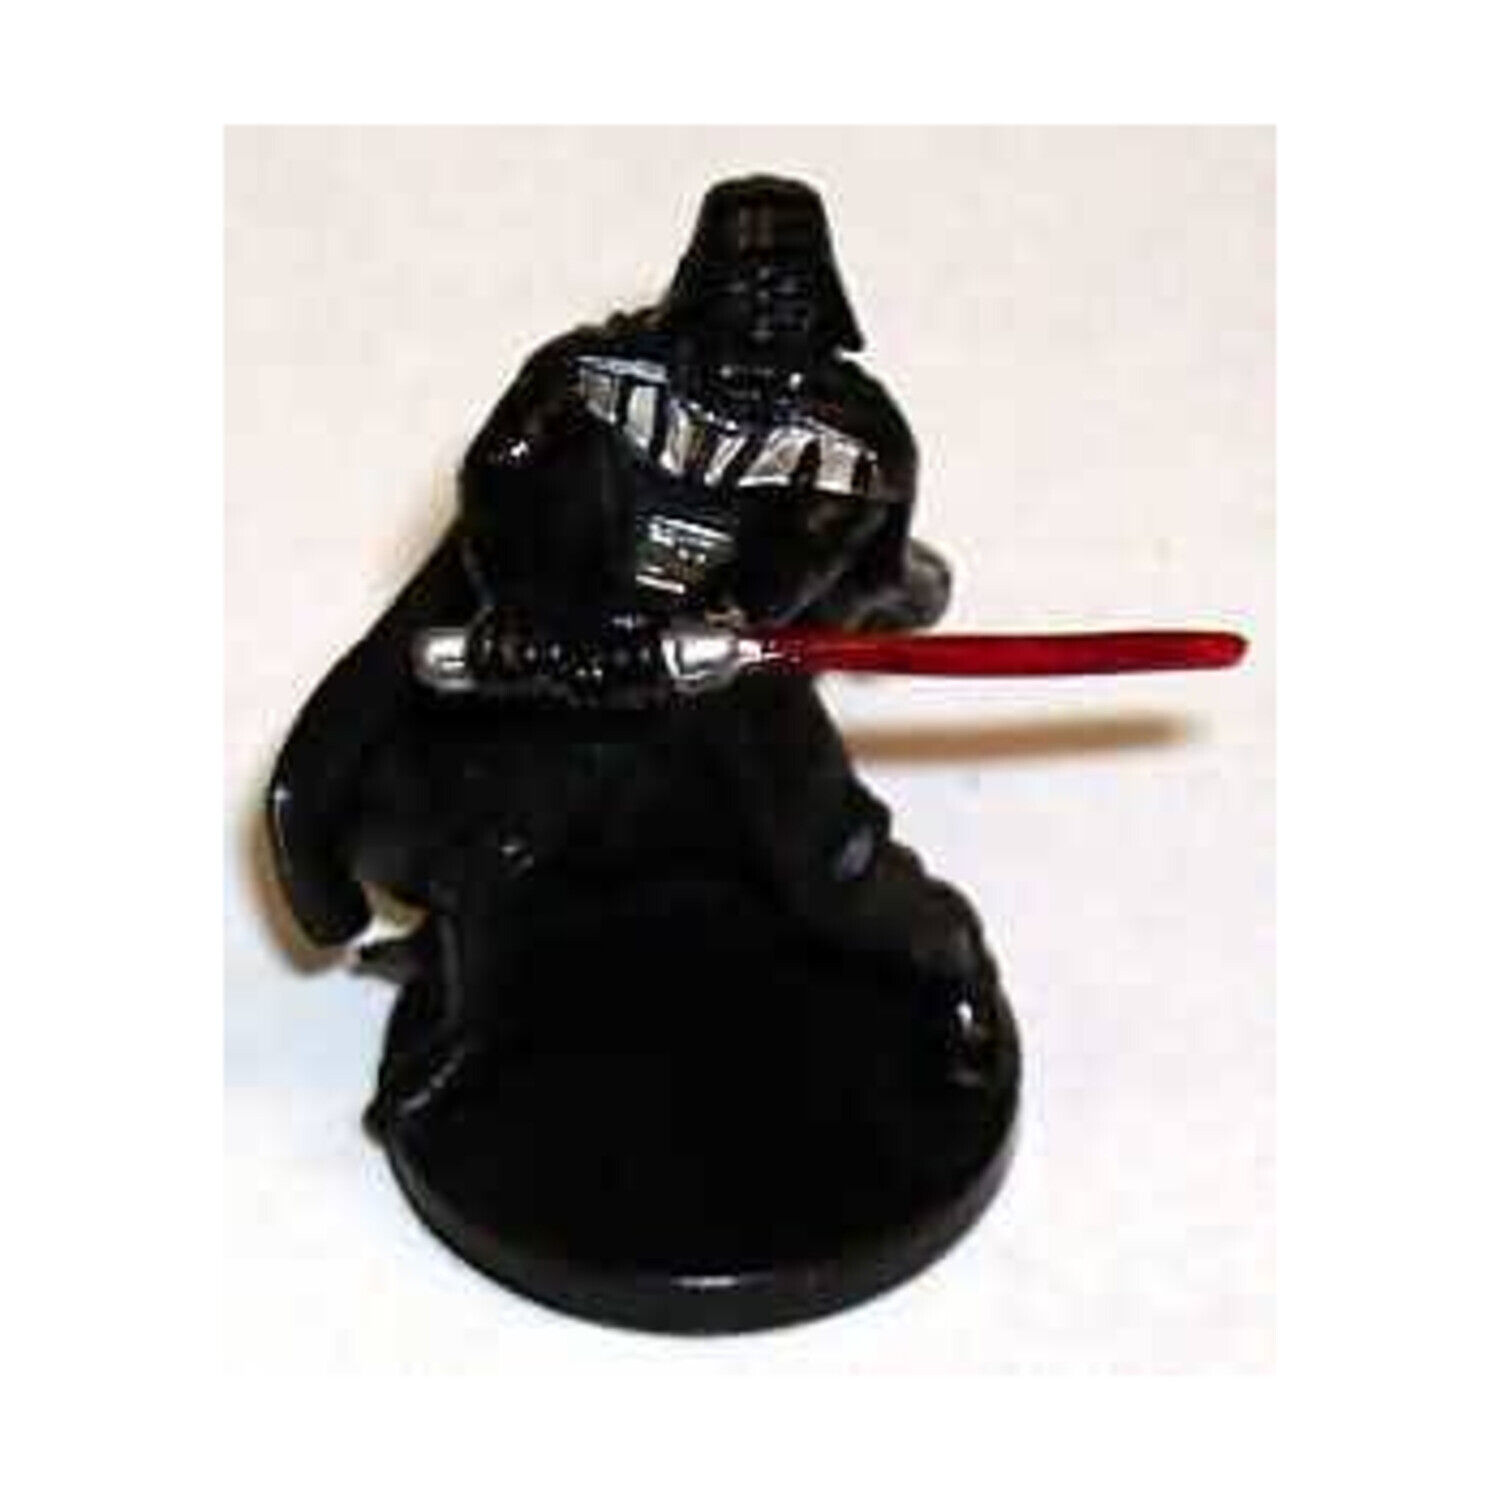 Wotc Star Wars Minis Force Unleashed Darth Vader - Unleashed (vr) Nm